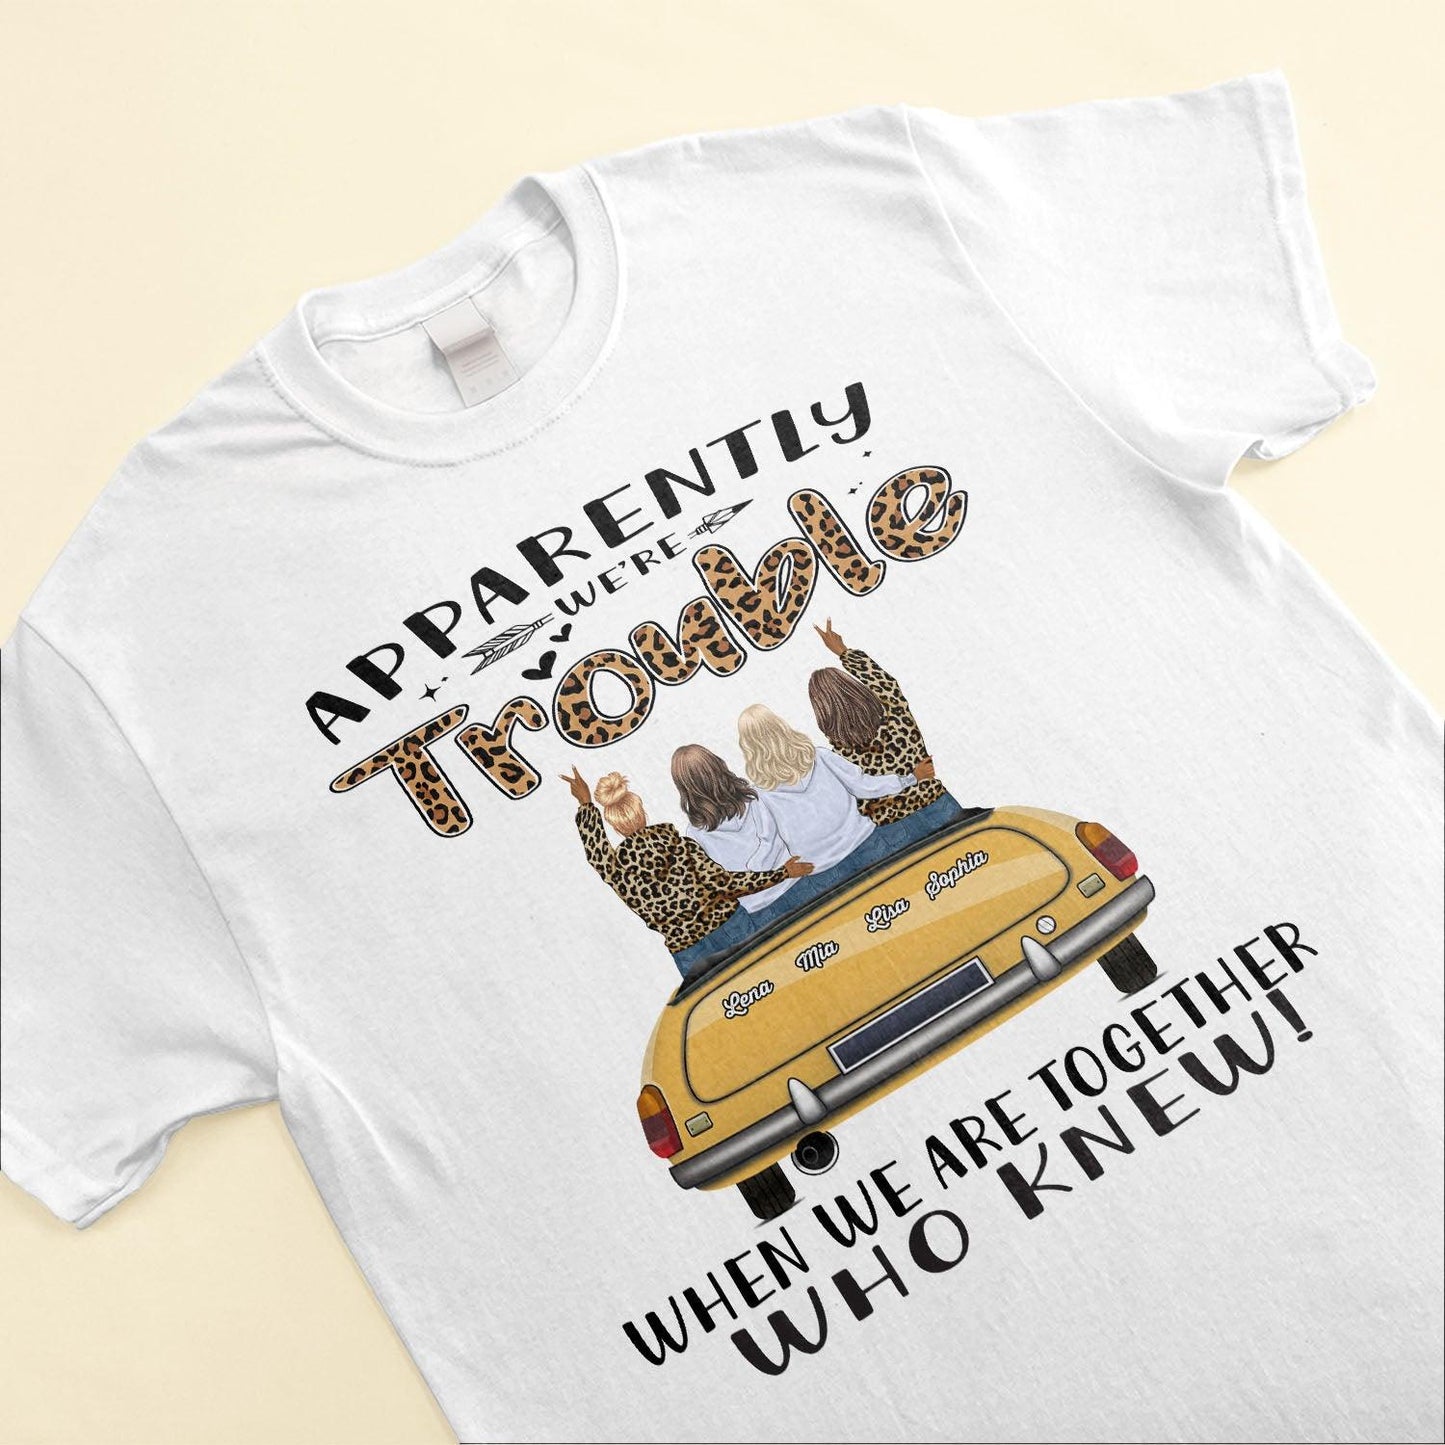 #girlstrip2022 - We're Trouble When We Are Together - Personalized Shirt - Gift For Girls, Road Trip Crew, Travel Buddies, Trippin', Campin' - Macorner